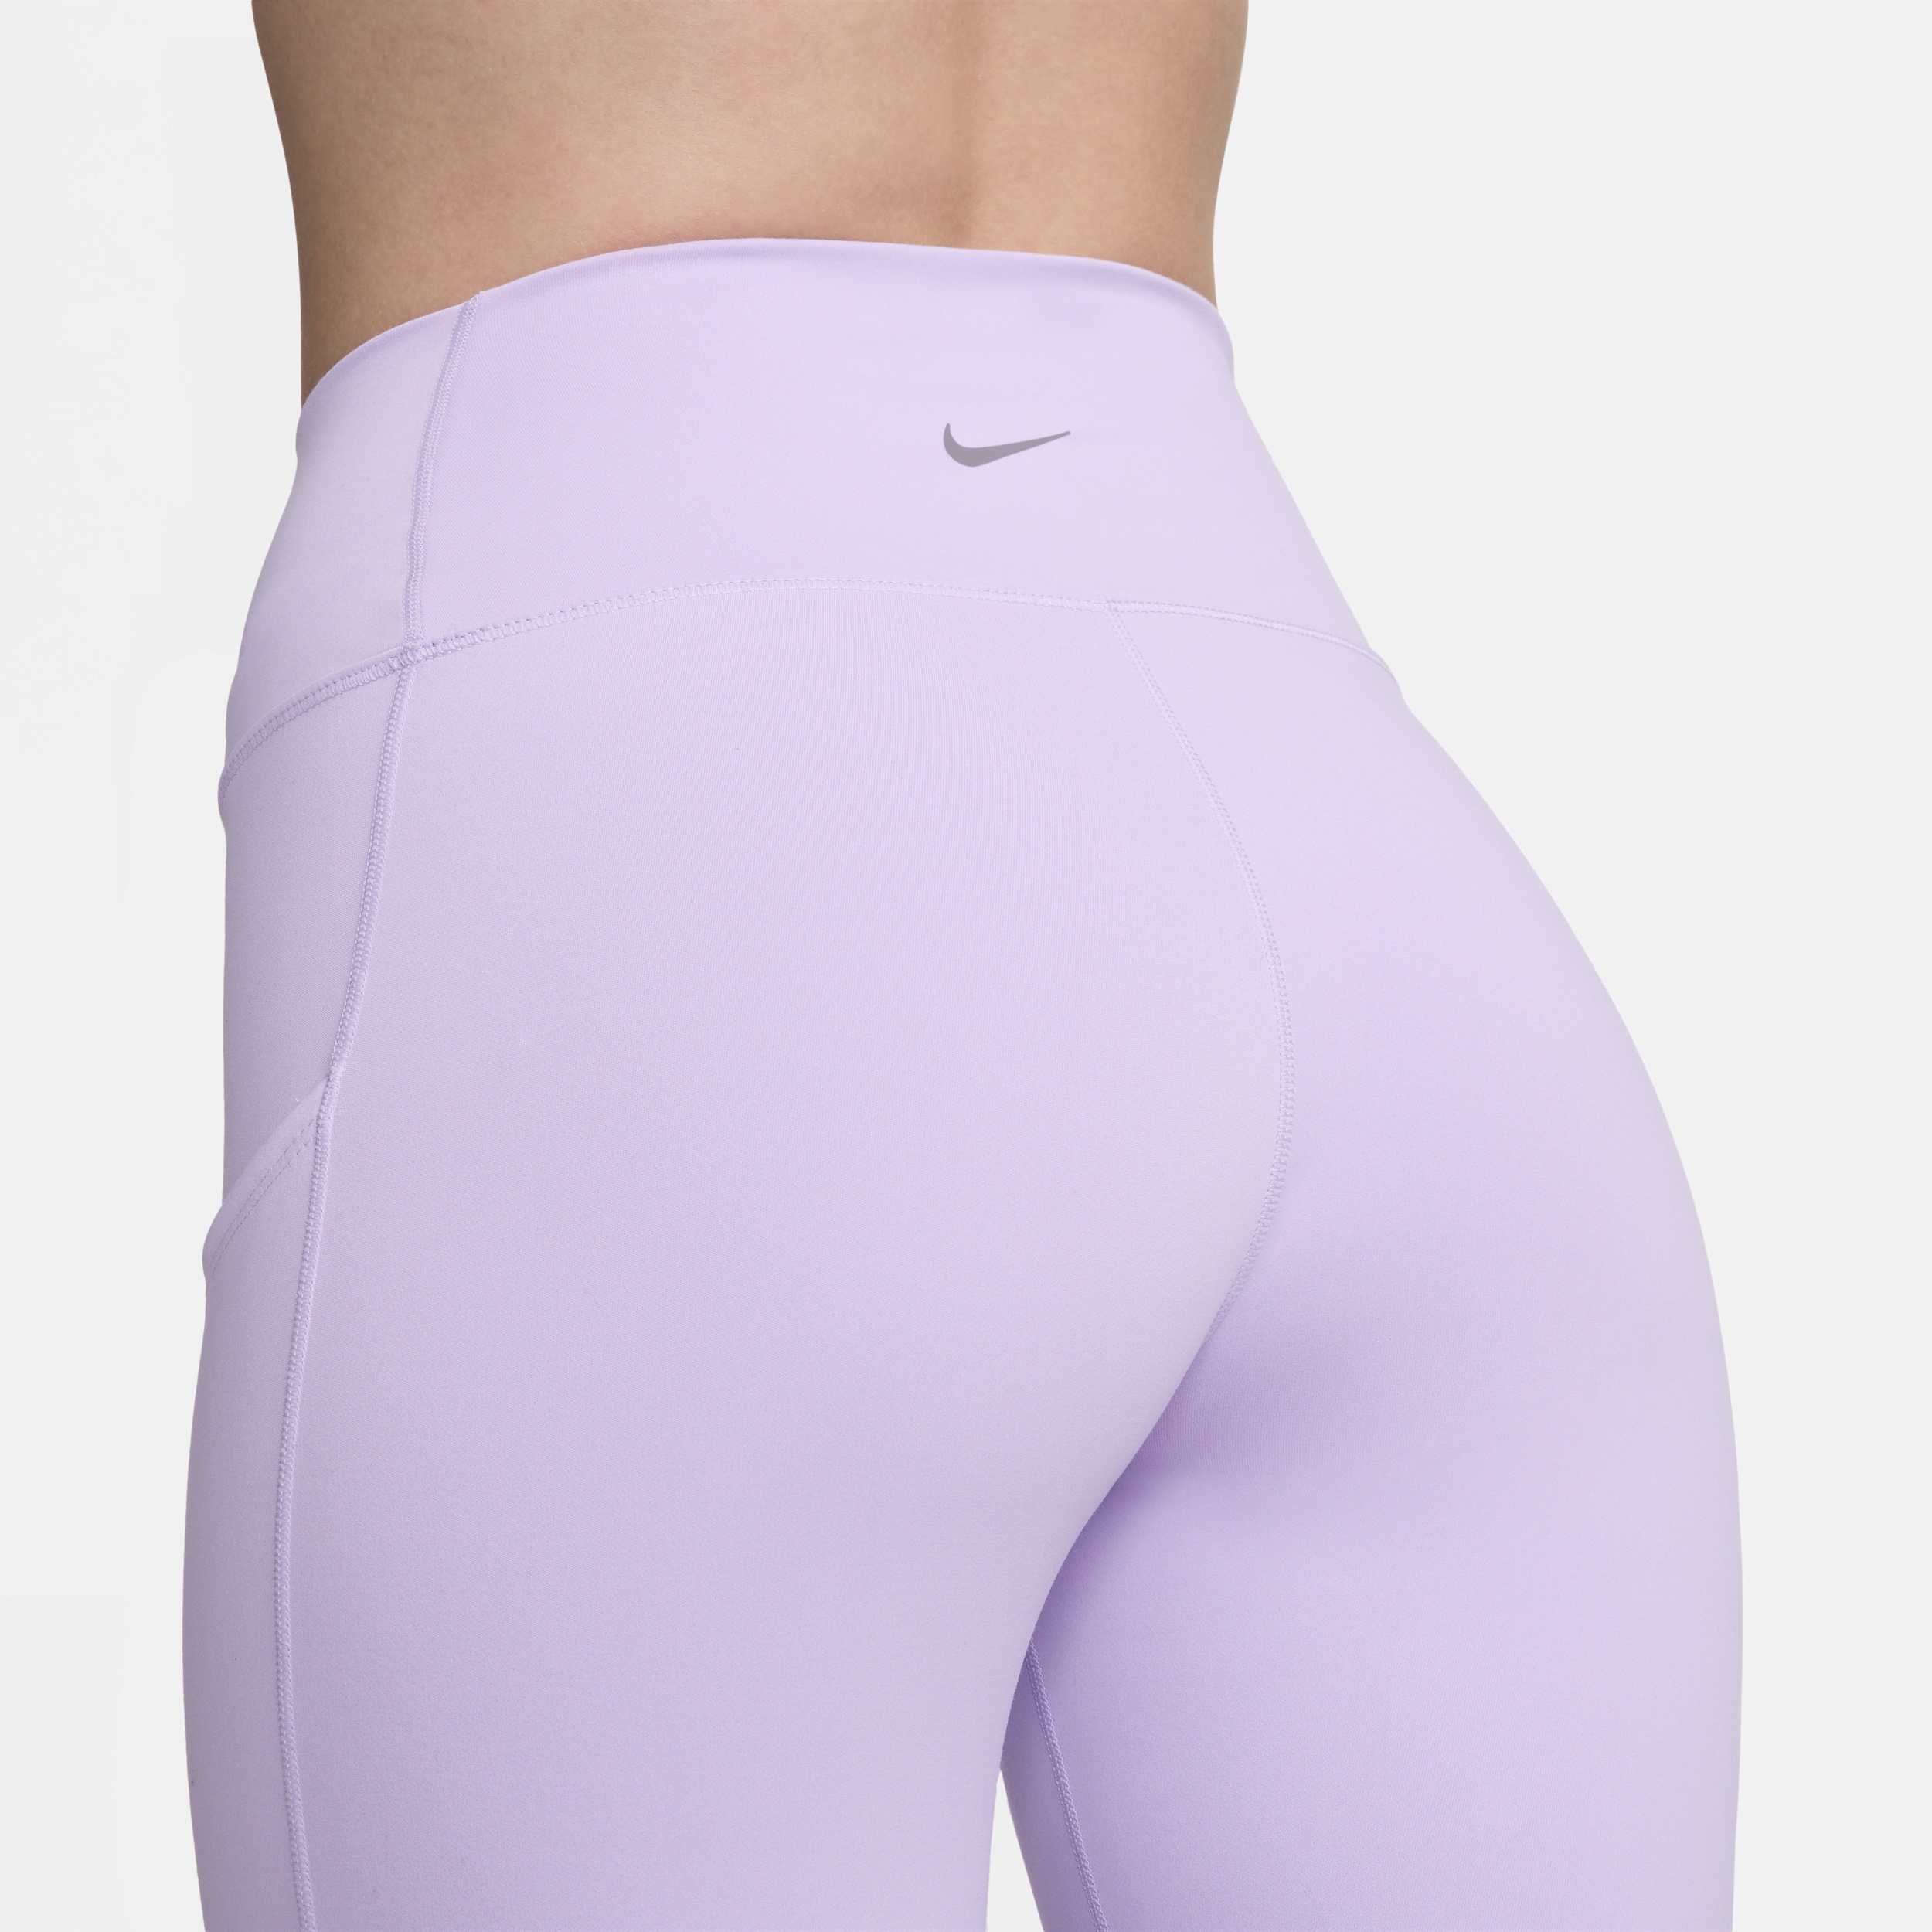 Nike Women's One High-Waisted 7/8 Leggings with Pockets - 5